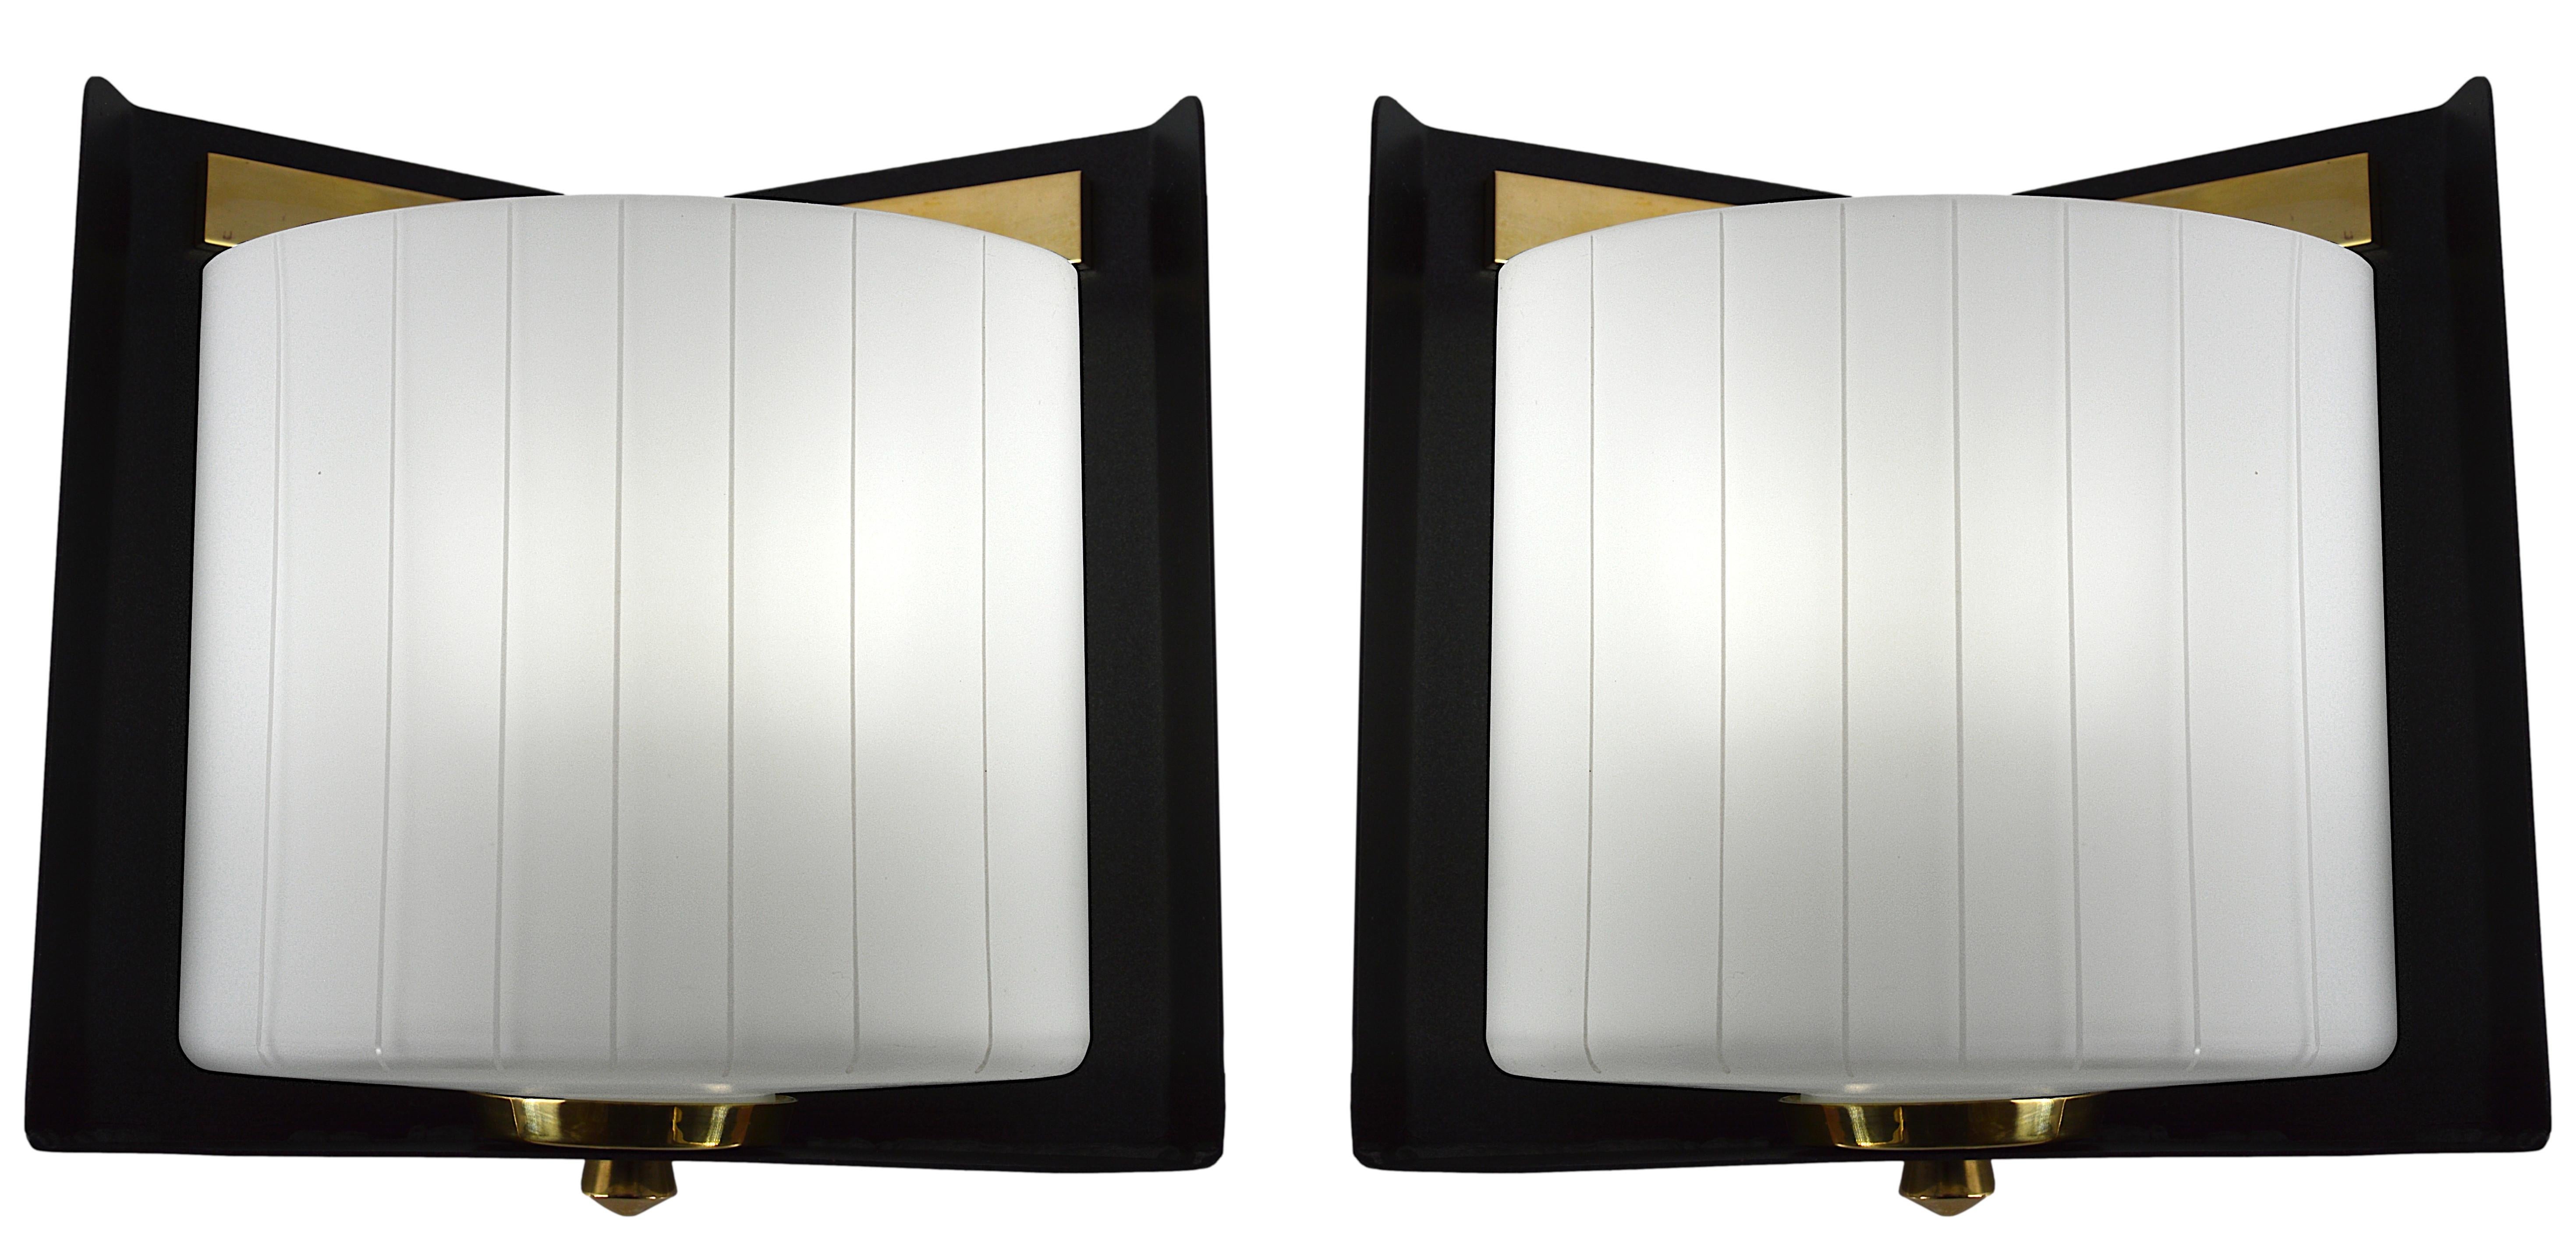 Pair of Mid-century wall sconces by Arlus (Paris), France, 1950s. Brass, metal and glass. Elegant elliptical lampshades in double glass, white on the inside and transparent decorated with slightly prominent vertical stripes on the outside. Height :